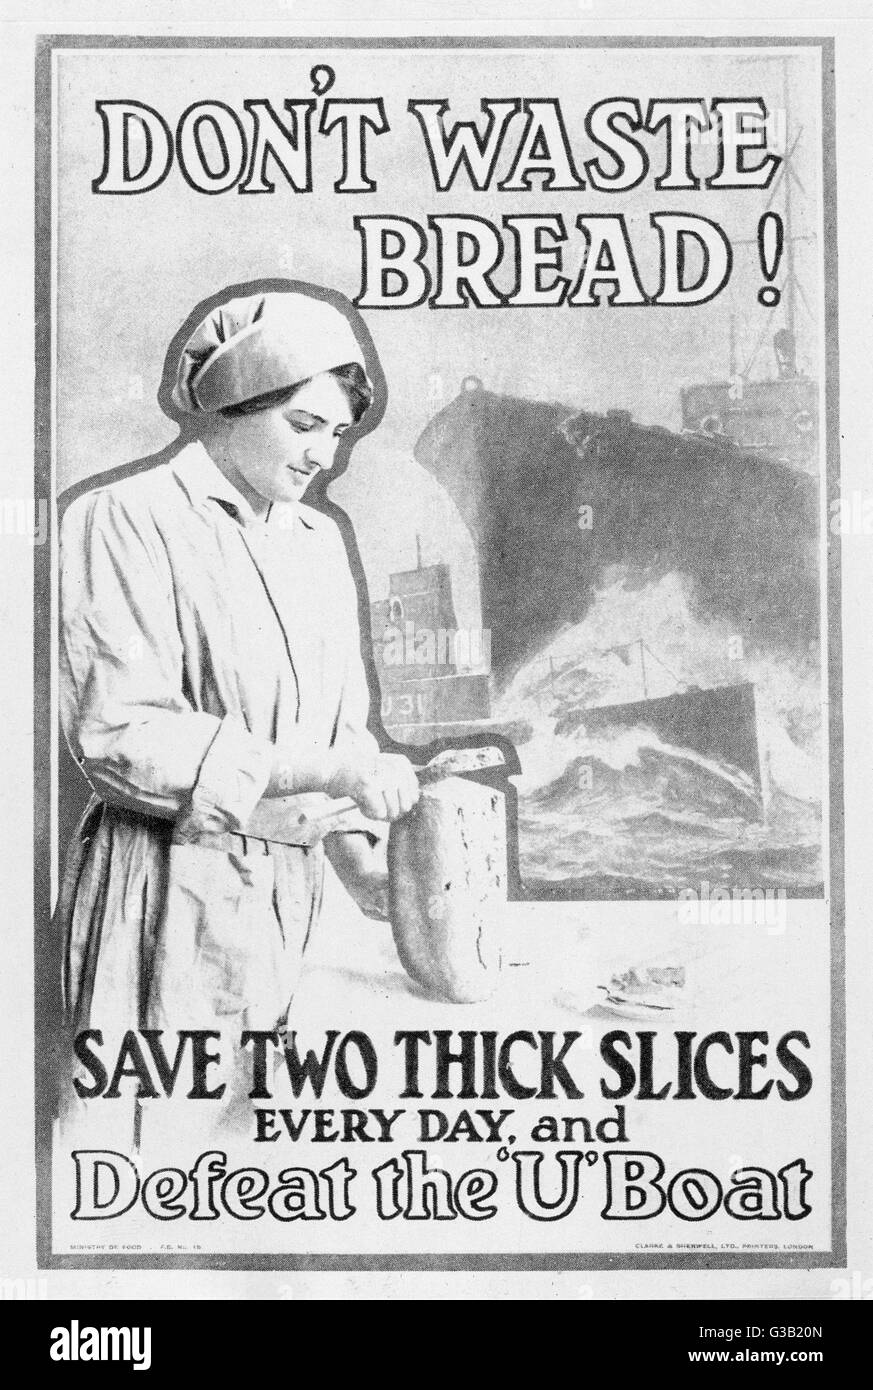 Don't Waste Bread -  save two thick slices every  day and defeat the U-Boat (World War One poster)      Date: 1917 Stock Photo